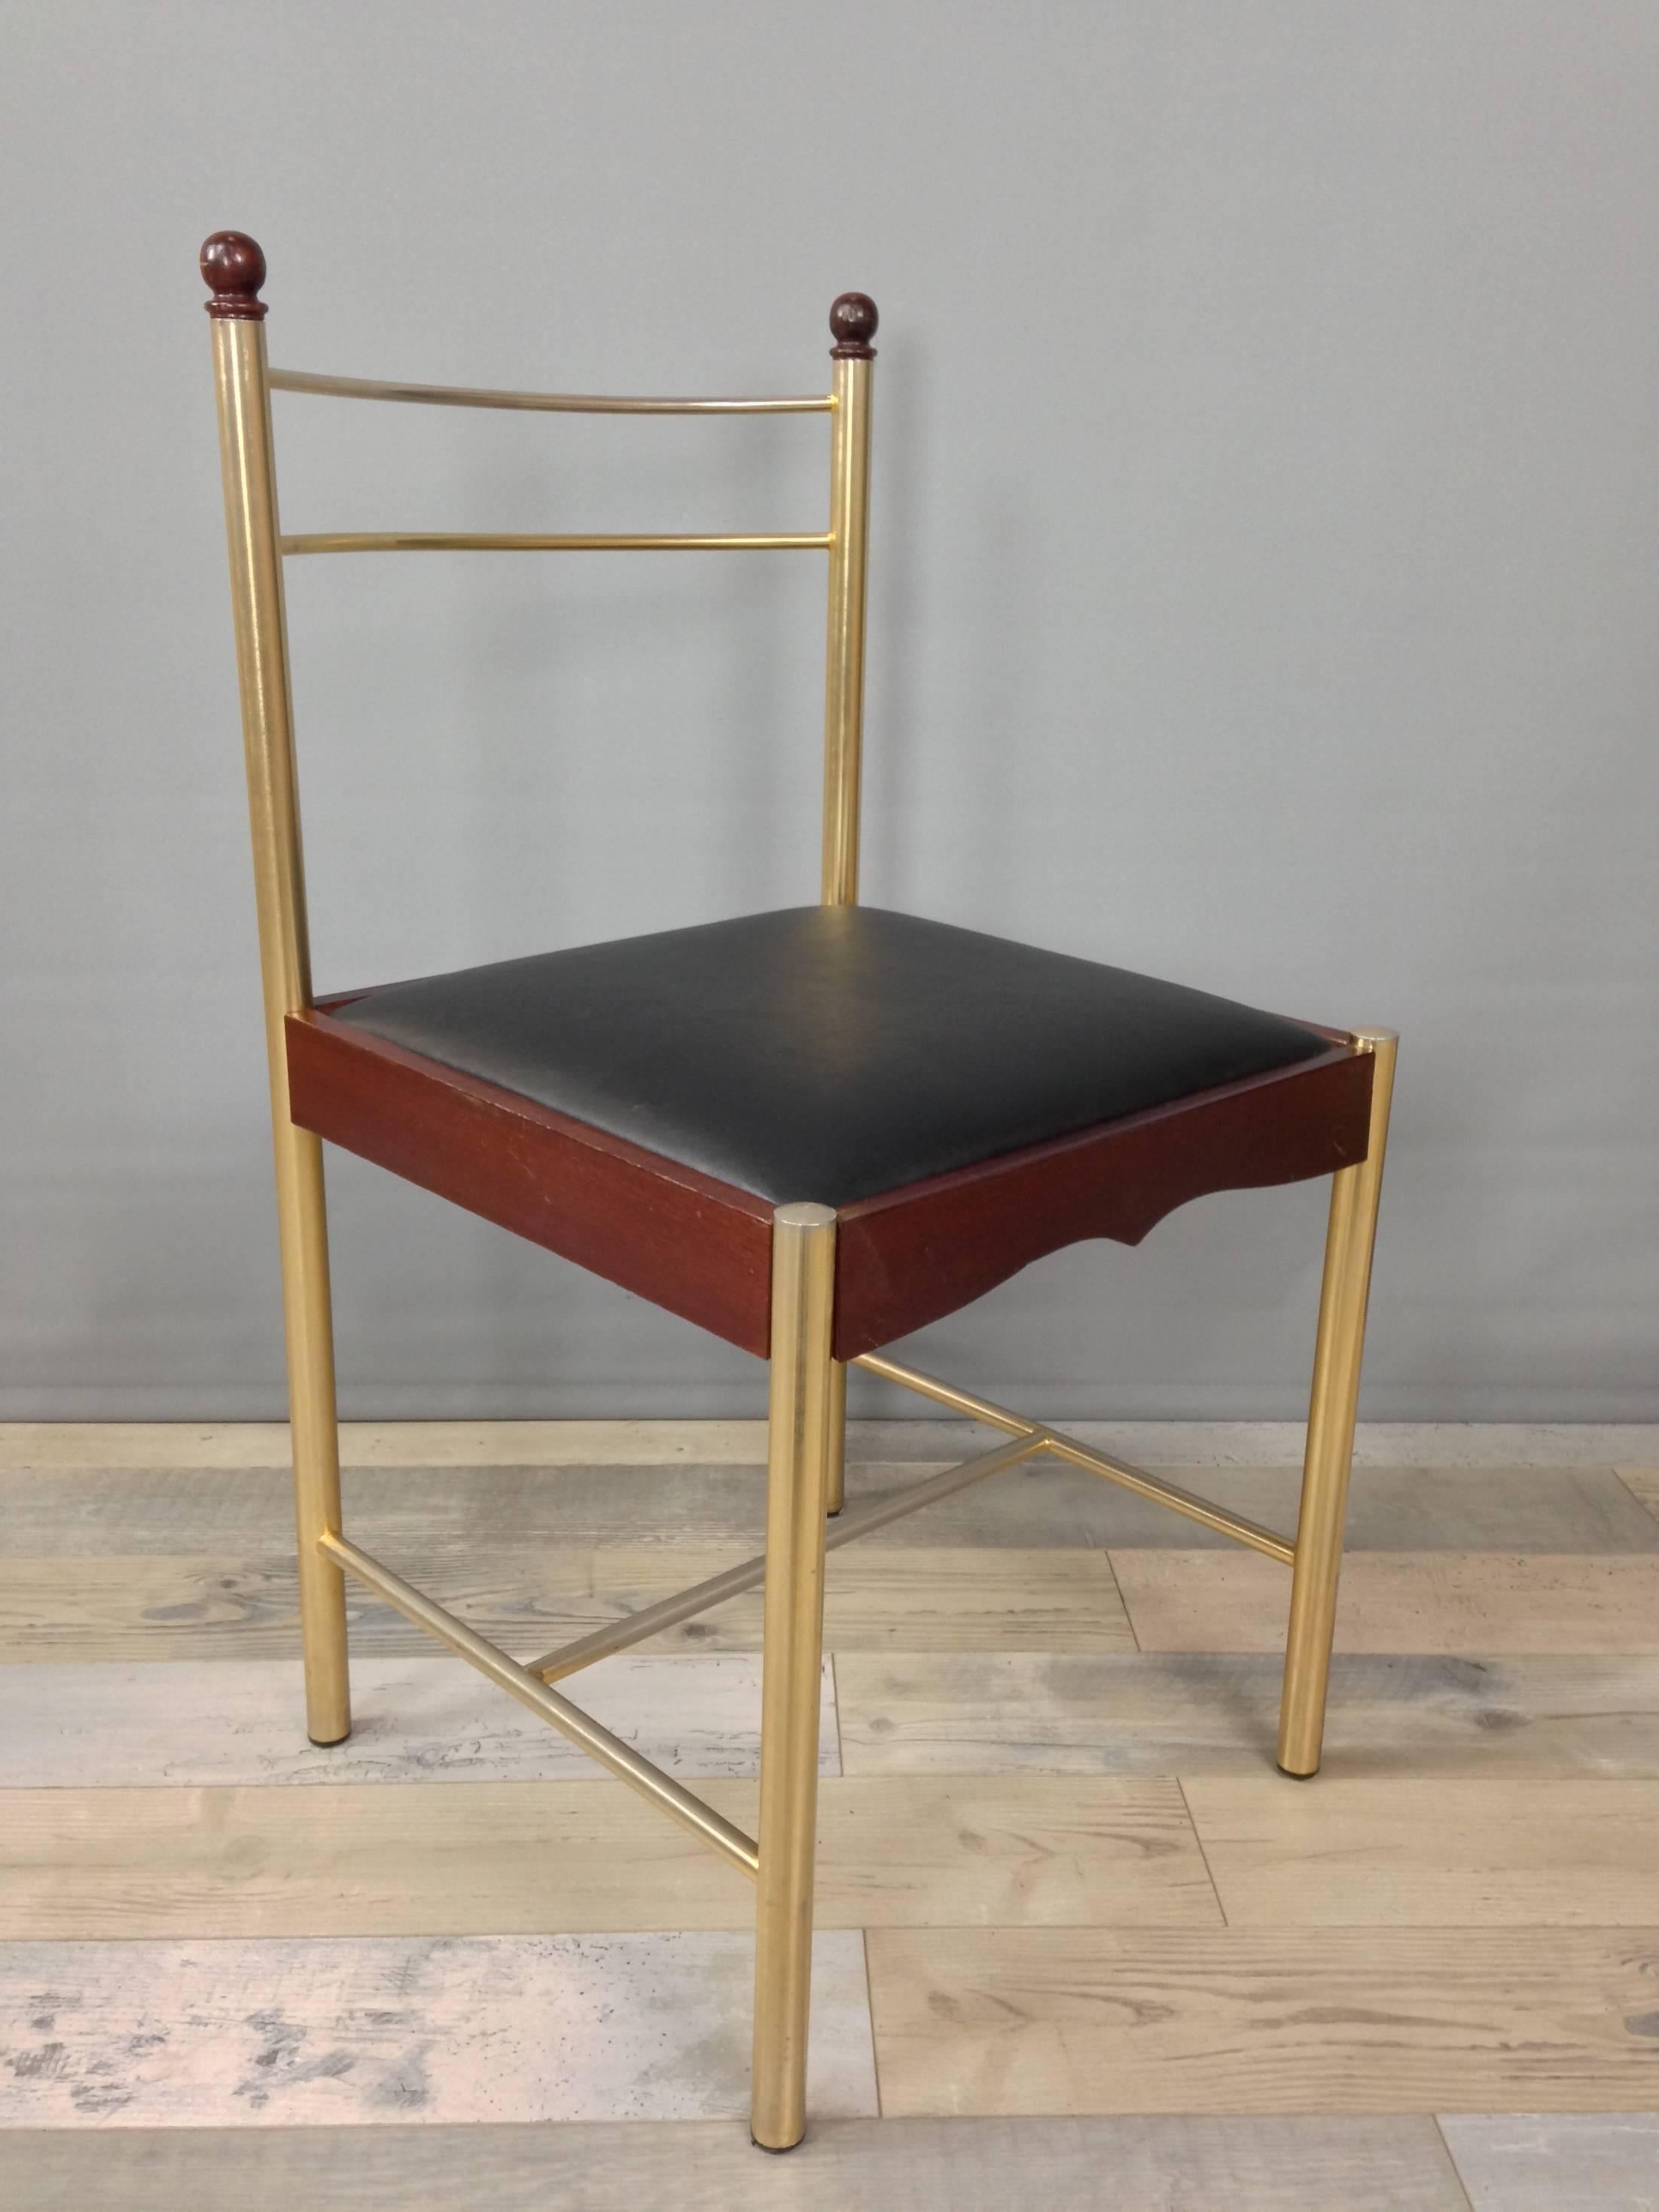 20th Century French Design from the 1970s Mahogany Desk and Its Matching Chair